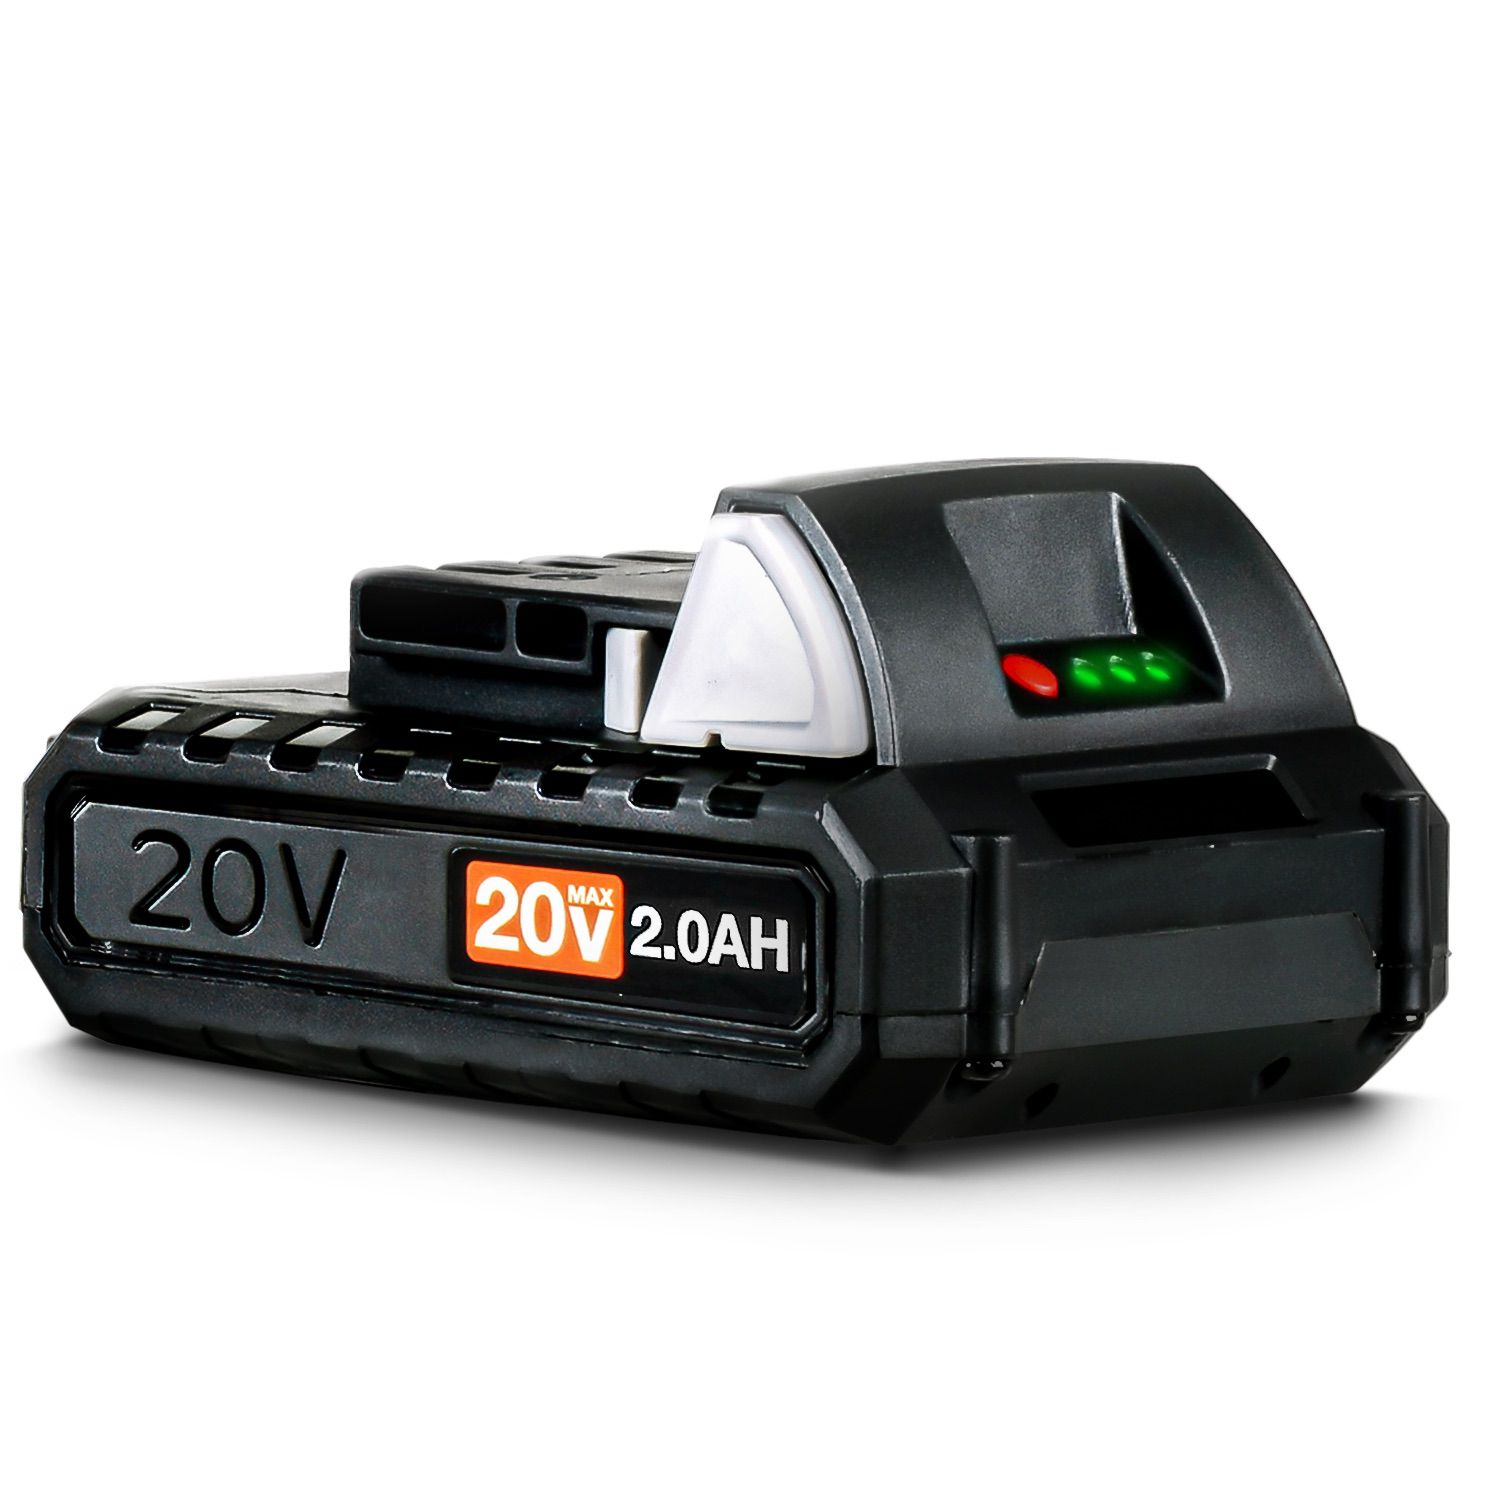 Buy Lithium Ion Battery 20V 2.0Ah for Cordless Electric Power